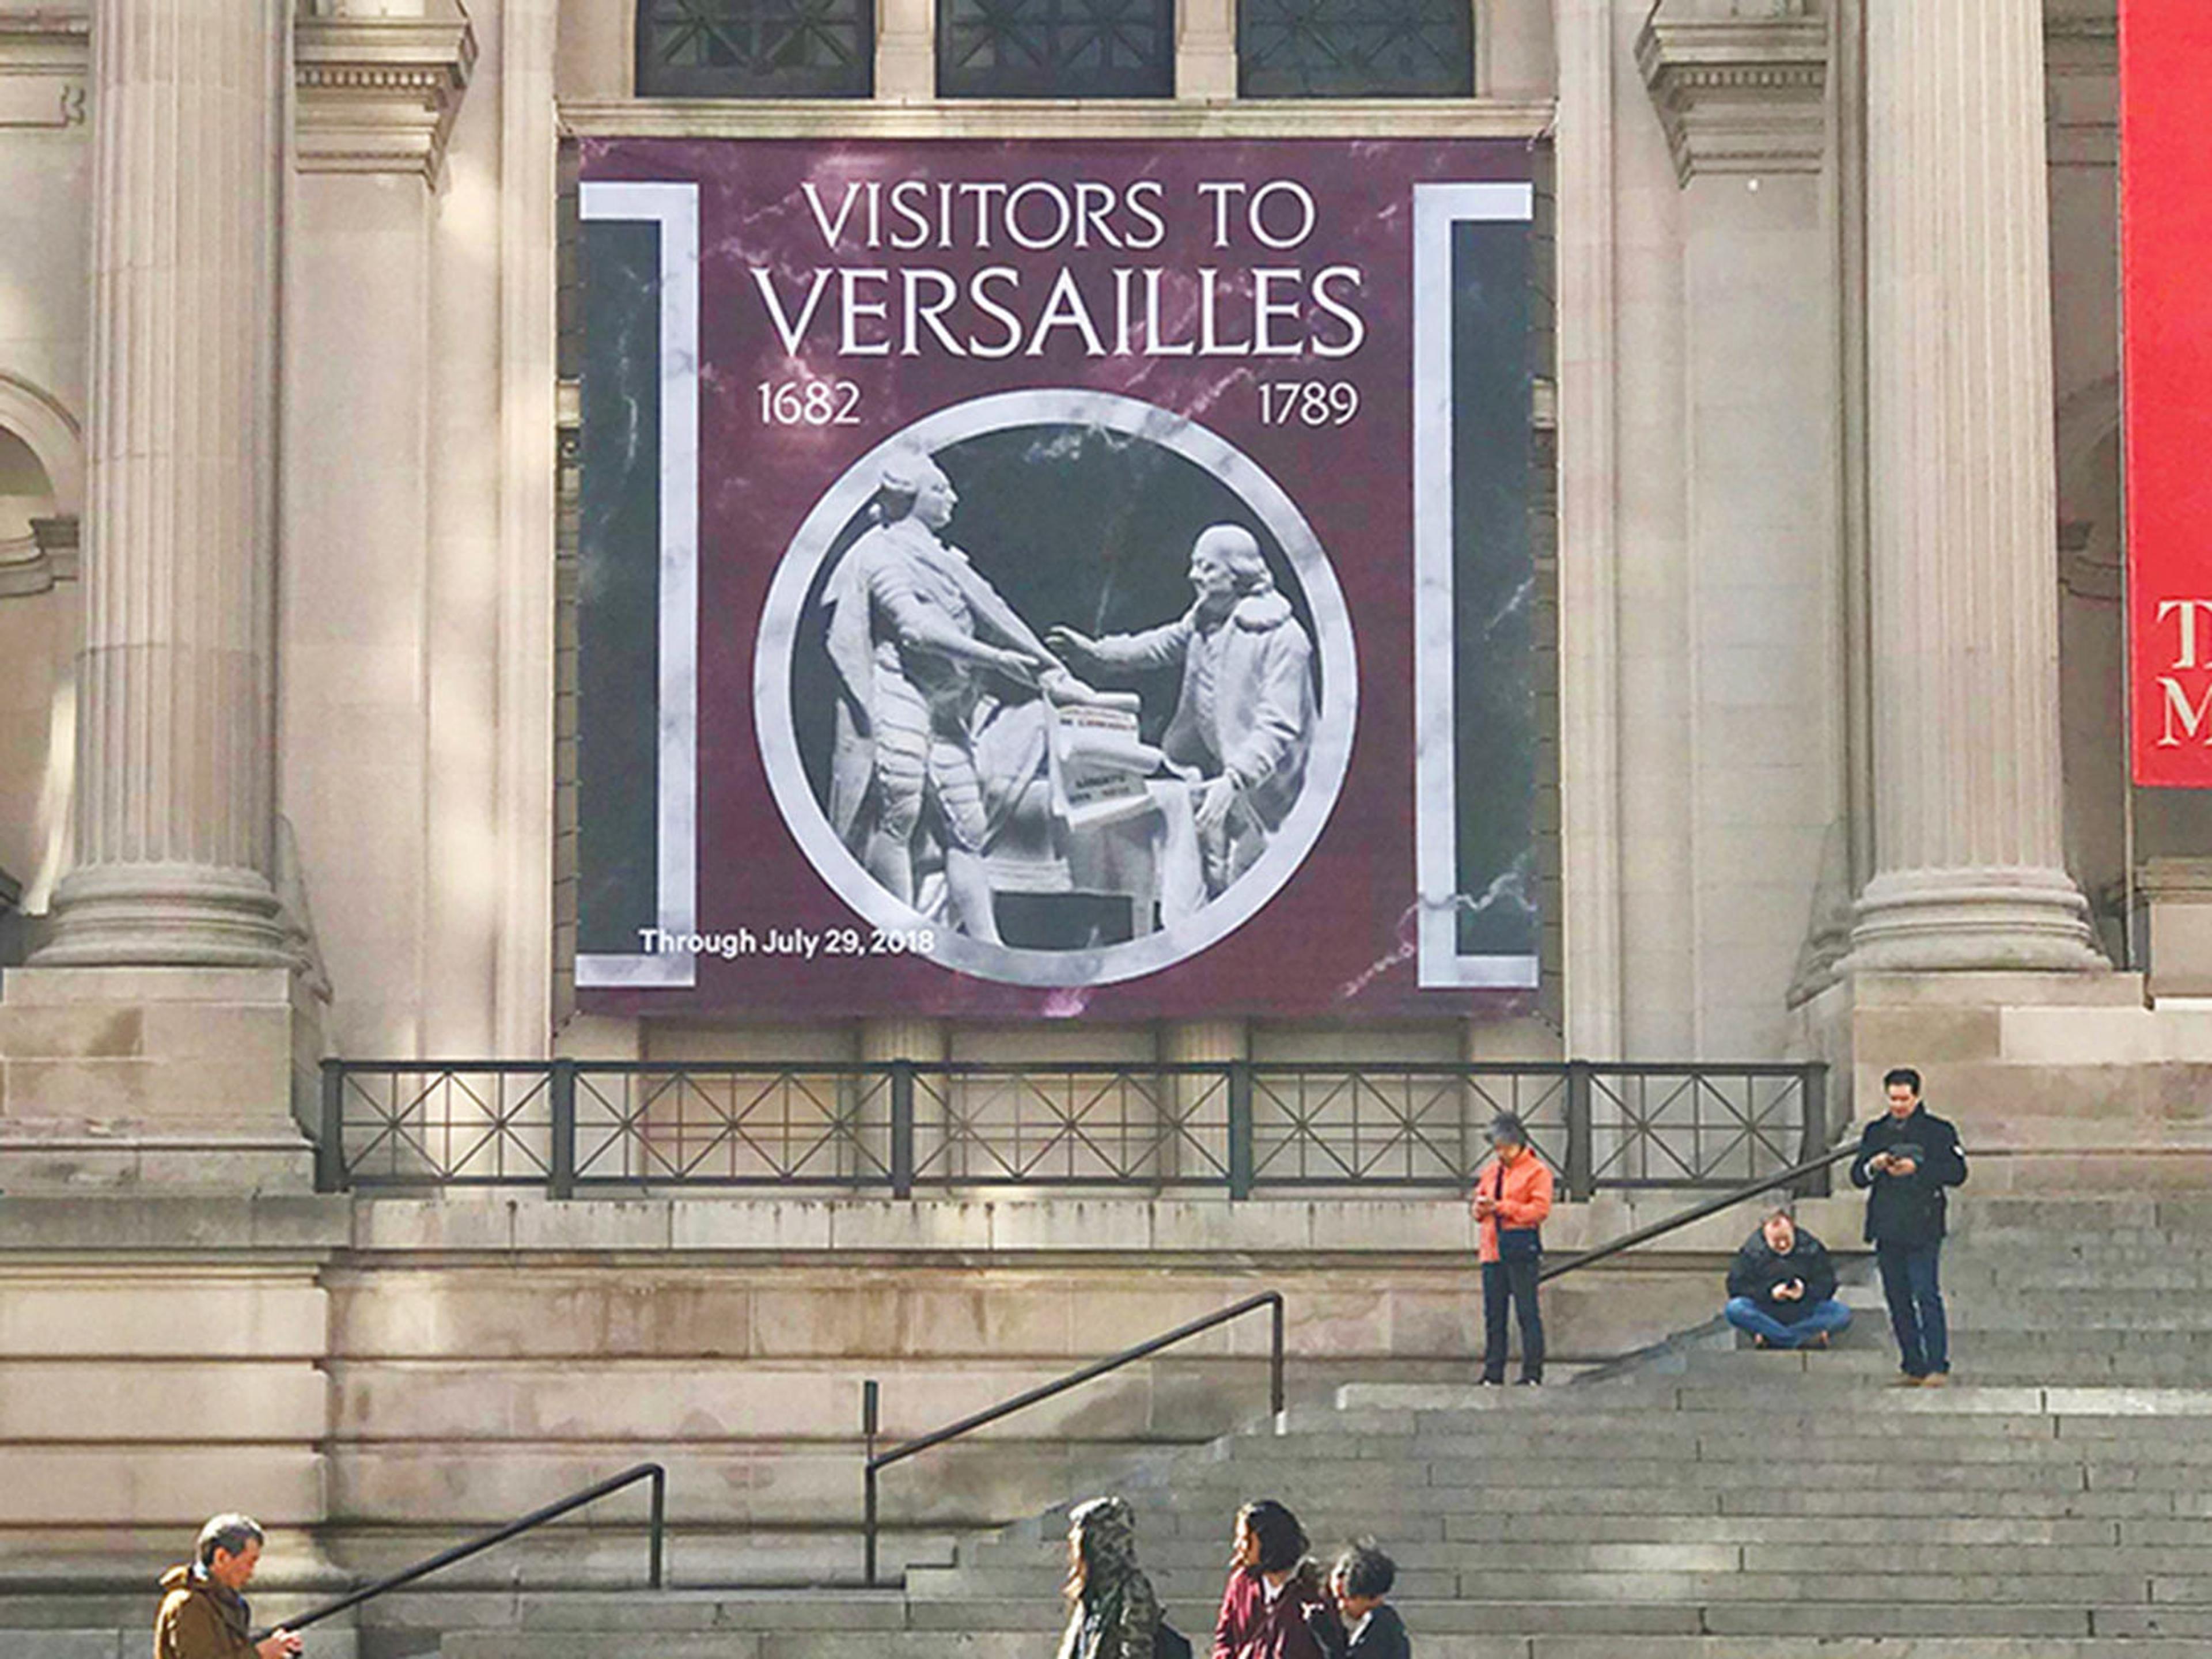 Exhibition and graphic design of Visitors to Versailles